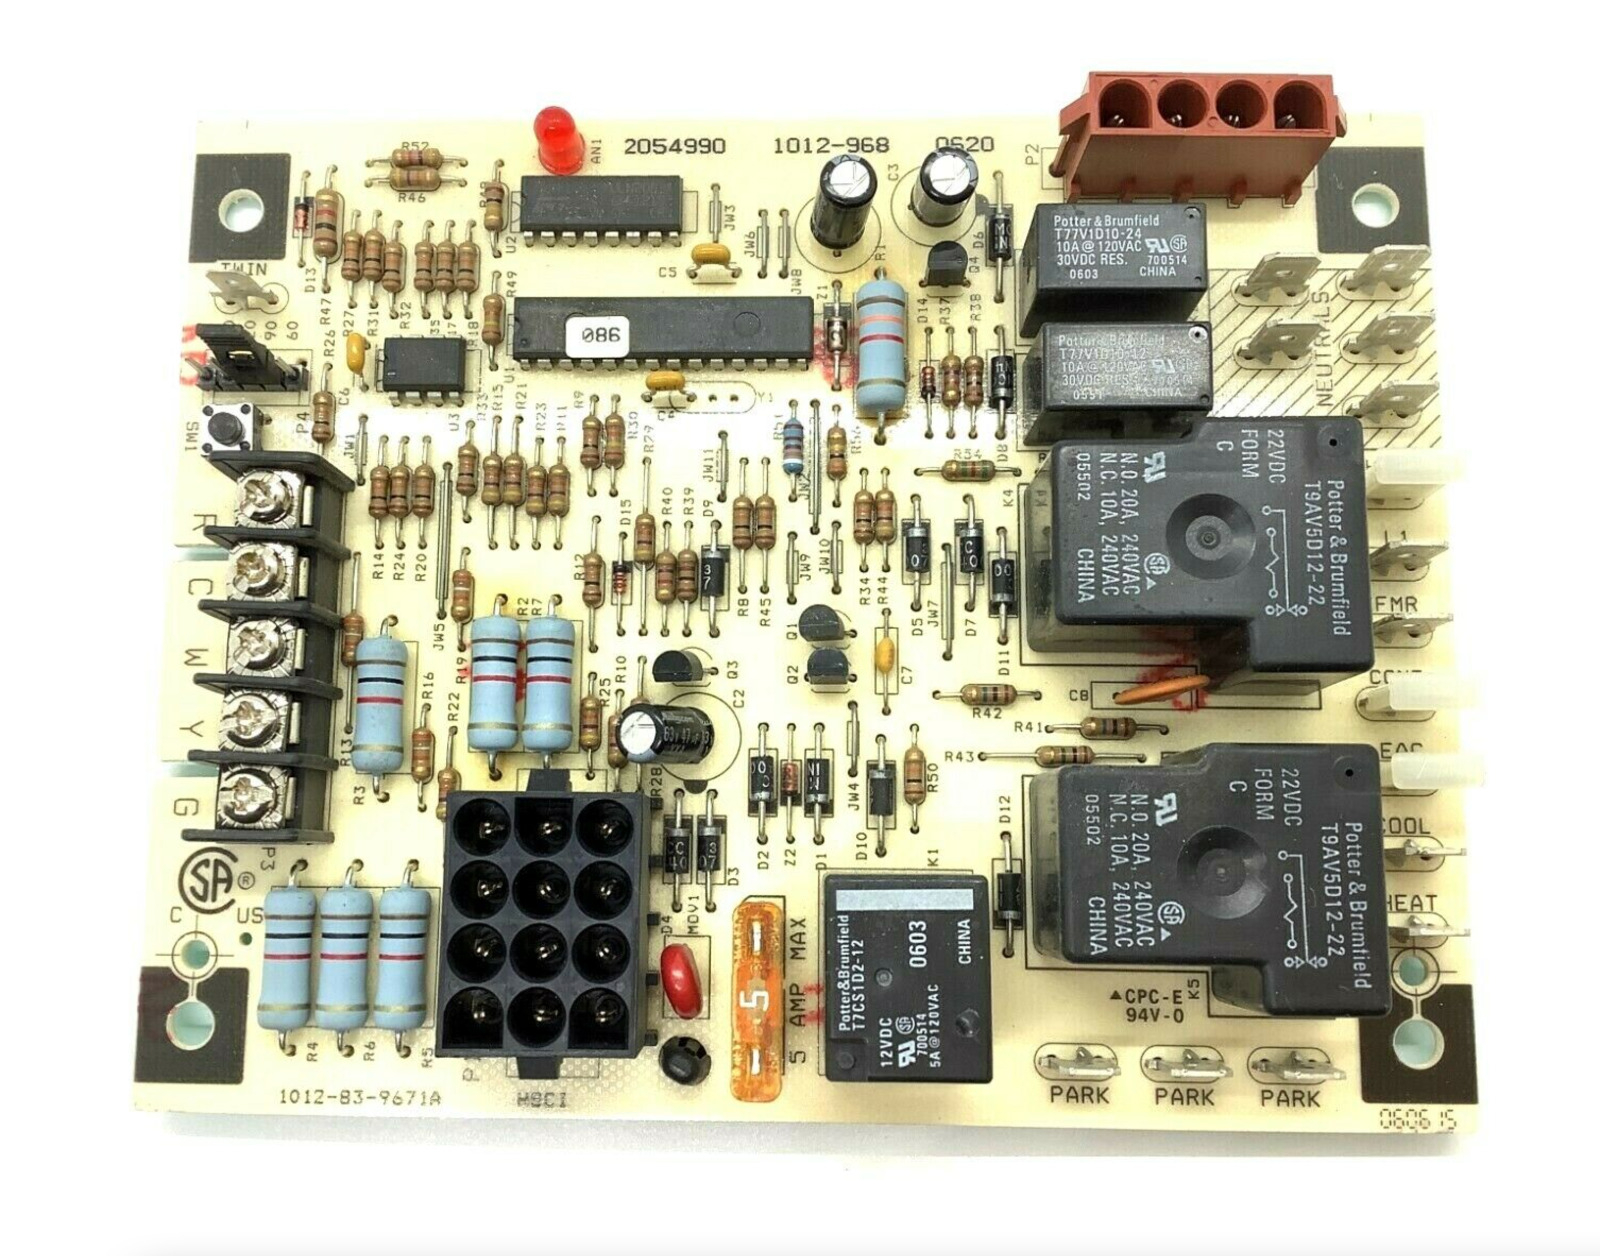 Lennox Armstrong 2054990 Control Circuit Board 1012-968 used tested working fast